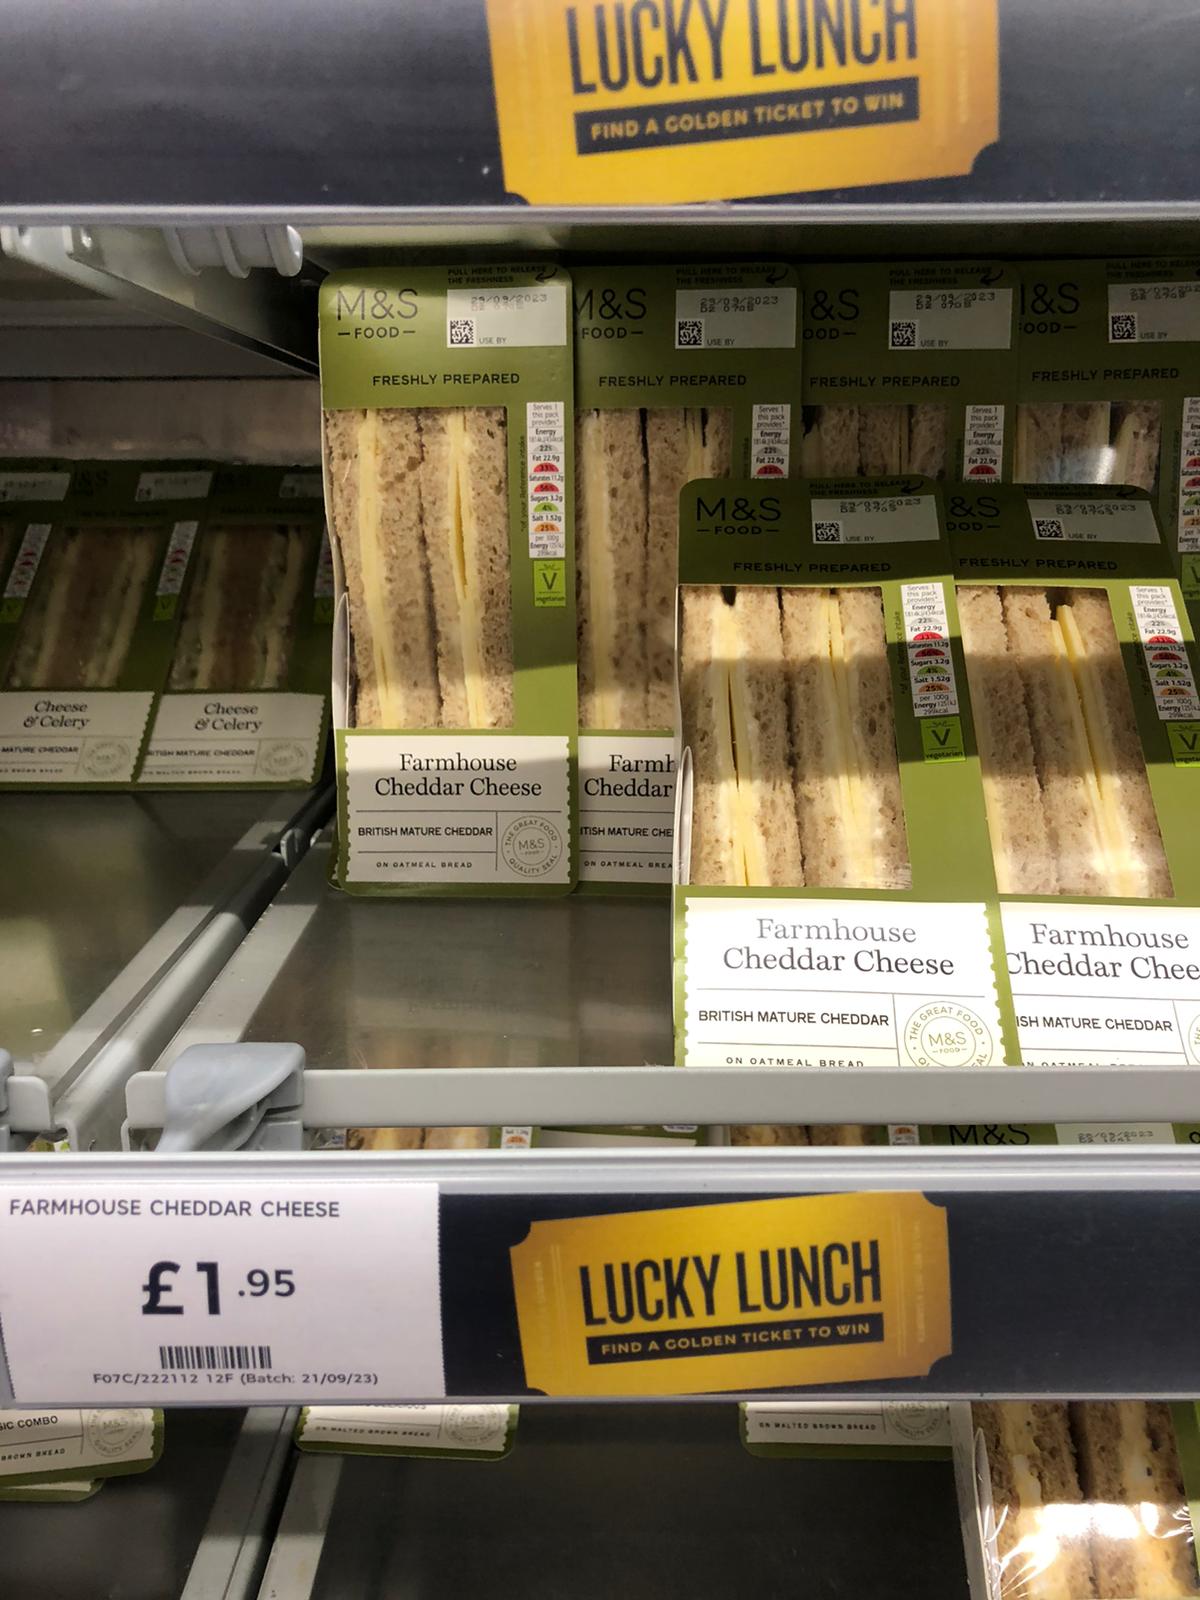 A simple cheese sandwich costs £1.95 at Marks and Spencer